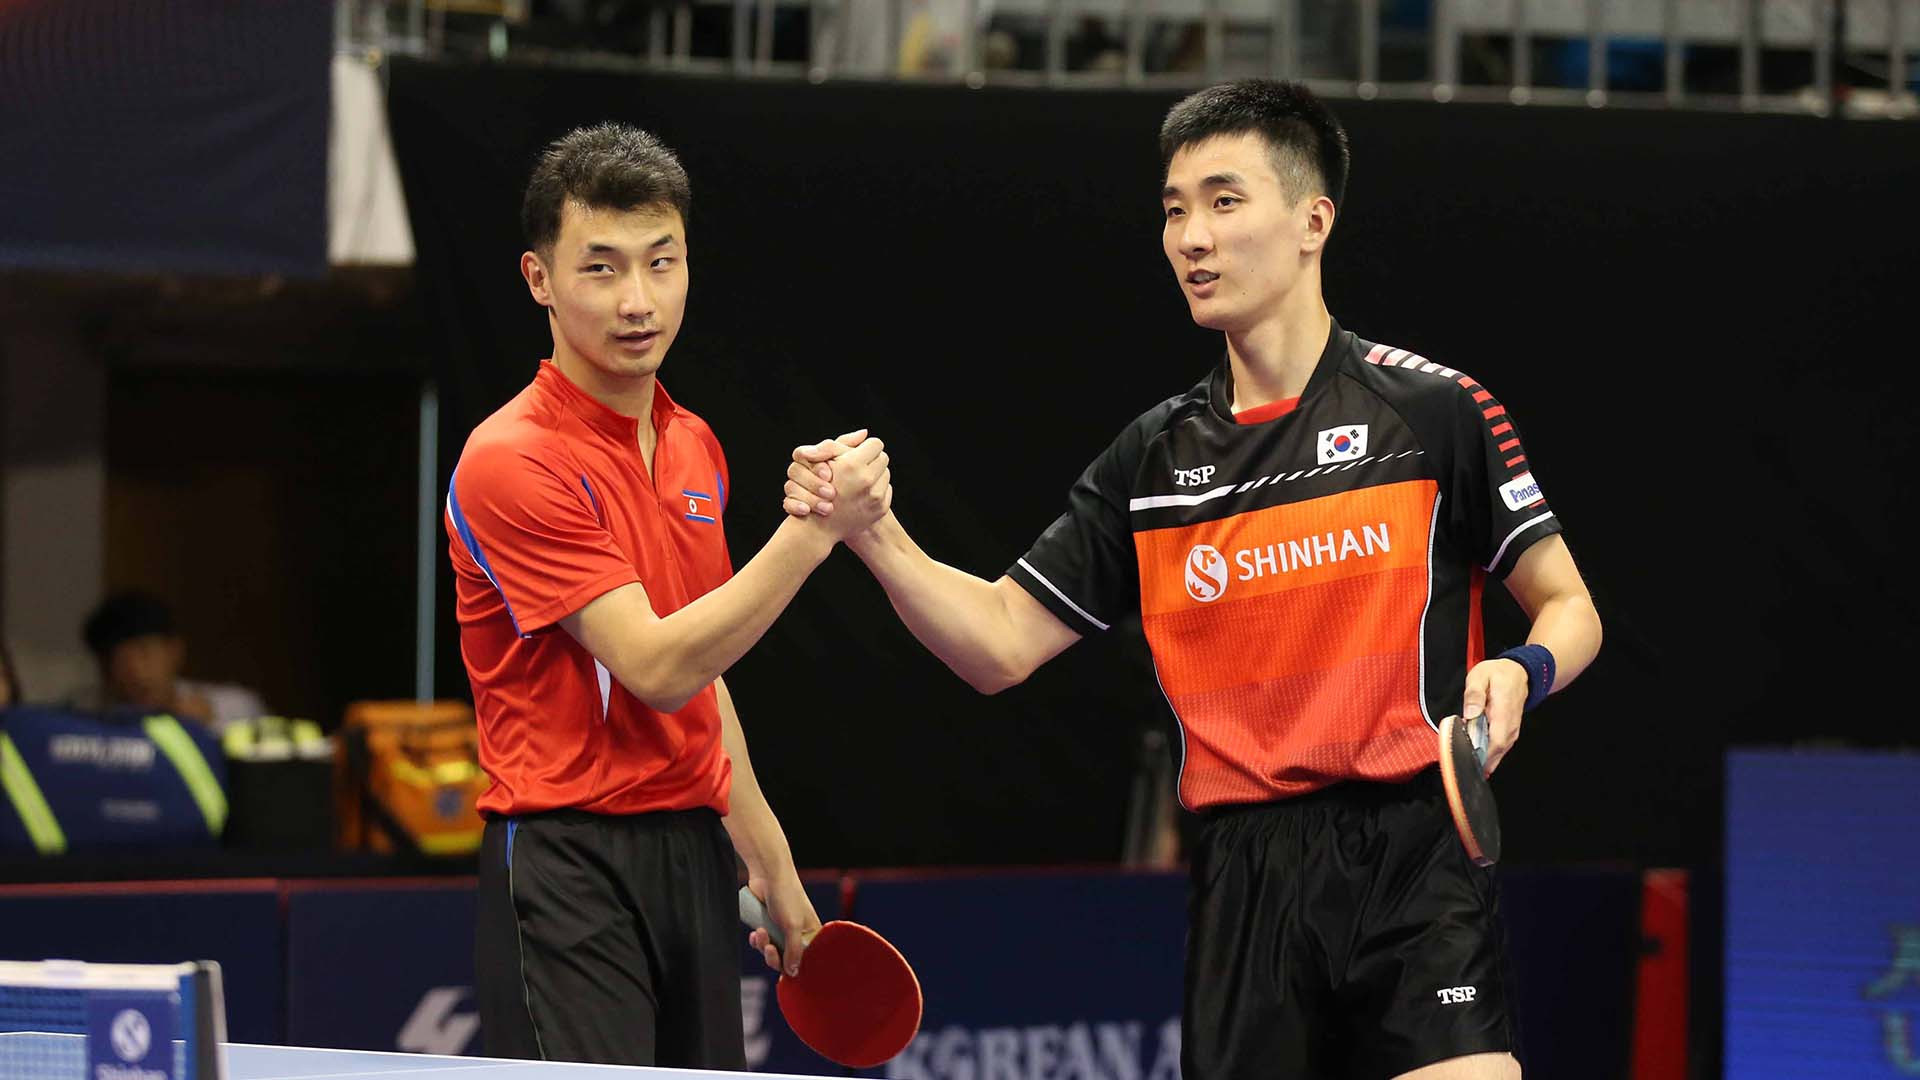  Lee Sangsu and Pak Sin Hyok made it to the semi-finals of the men's doubles, where they eventually lost in three games ©An Sungho